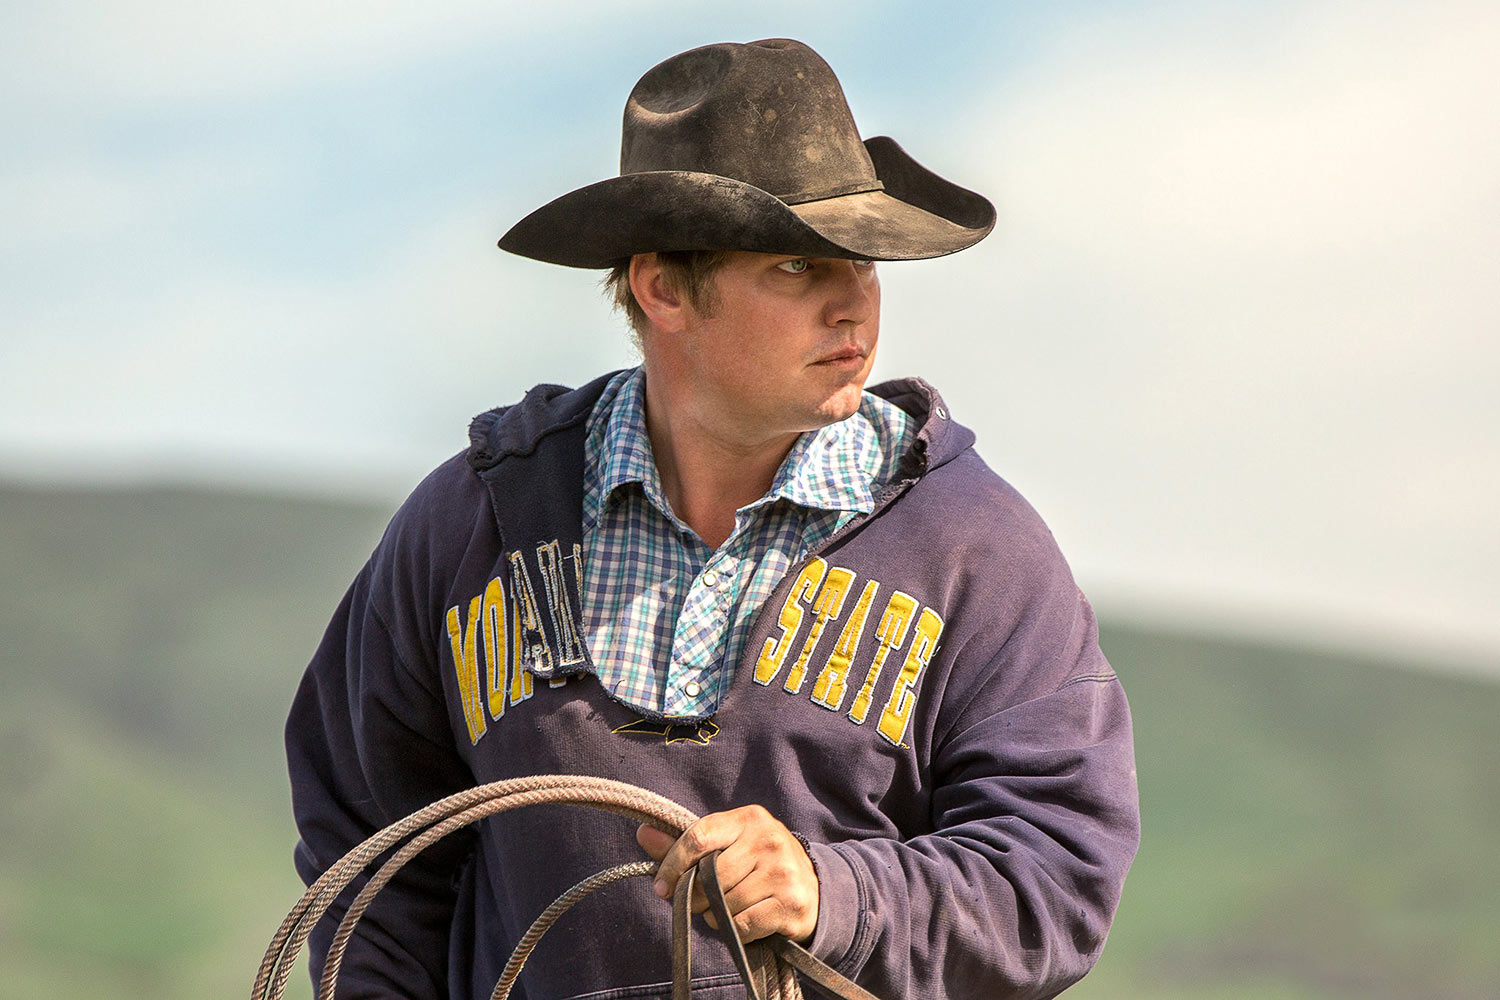 A cowboy wearing a torn Montana State University sweatshirts ropes cattle on a ranch near Cleveland, Montana.&nbsp;→ License Photo